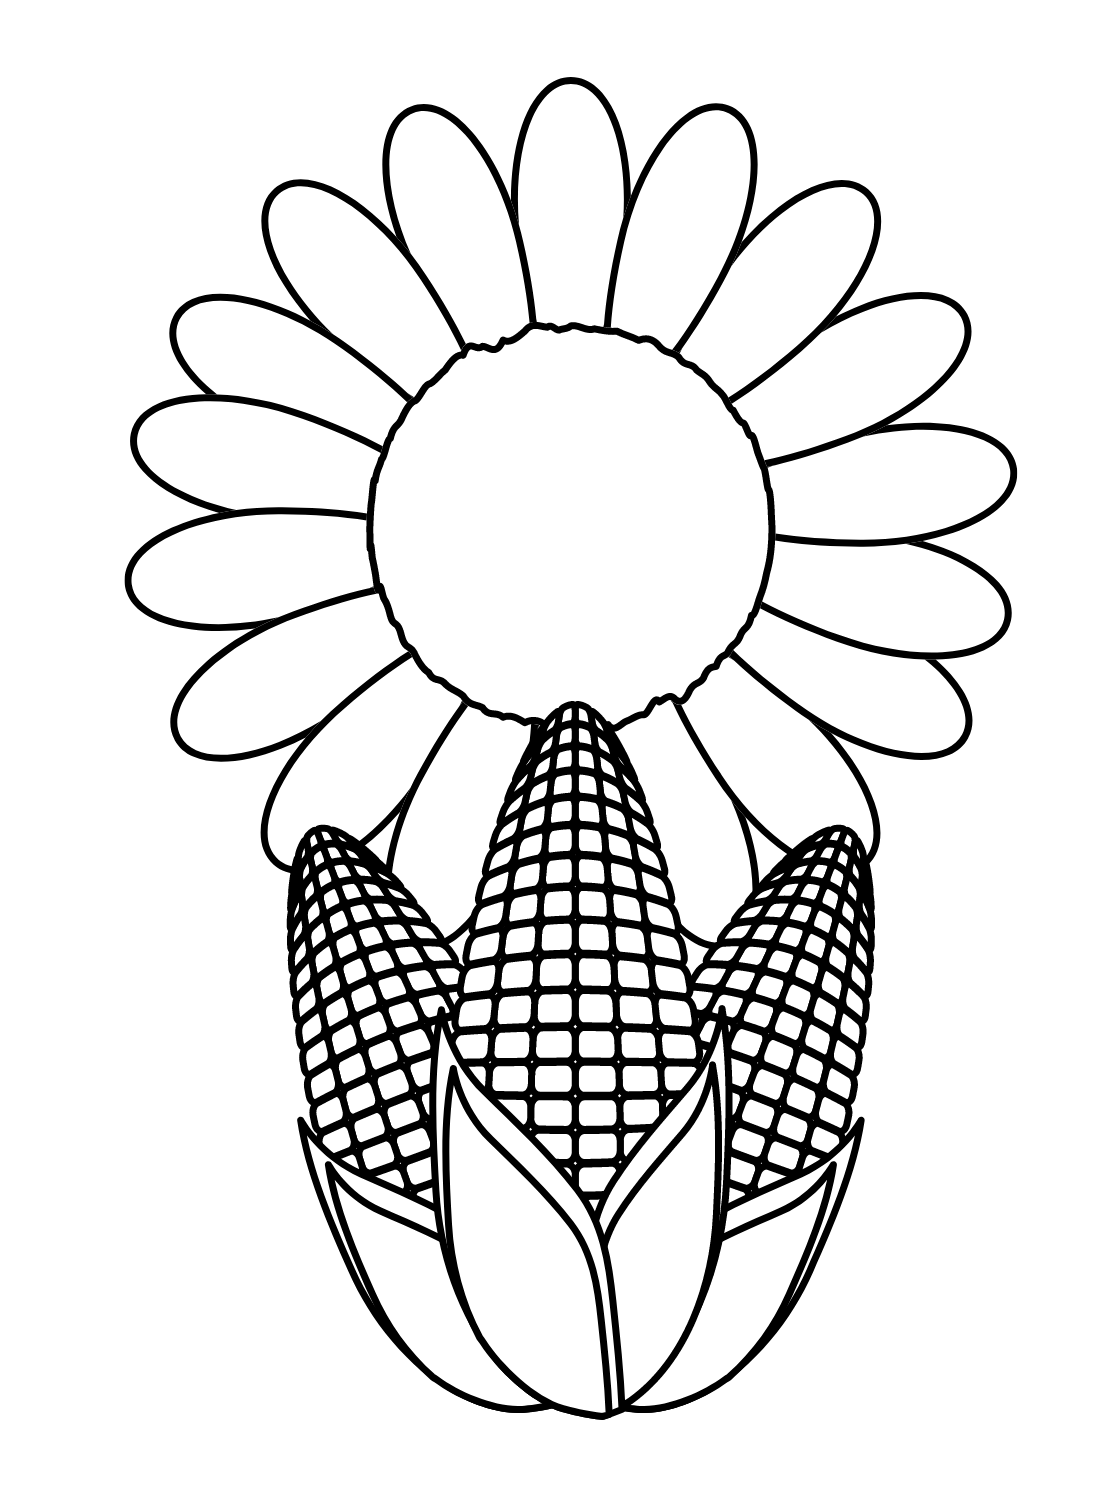 Sunflower with Corns Coloring Pages